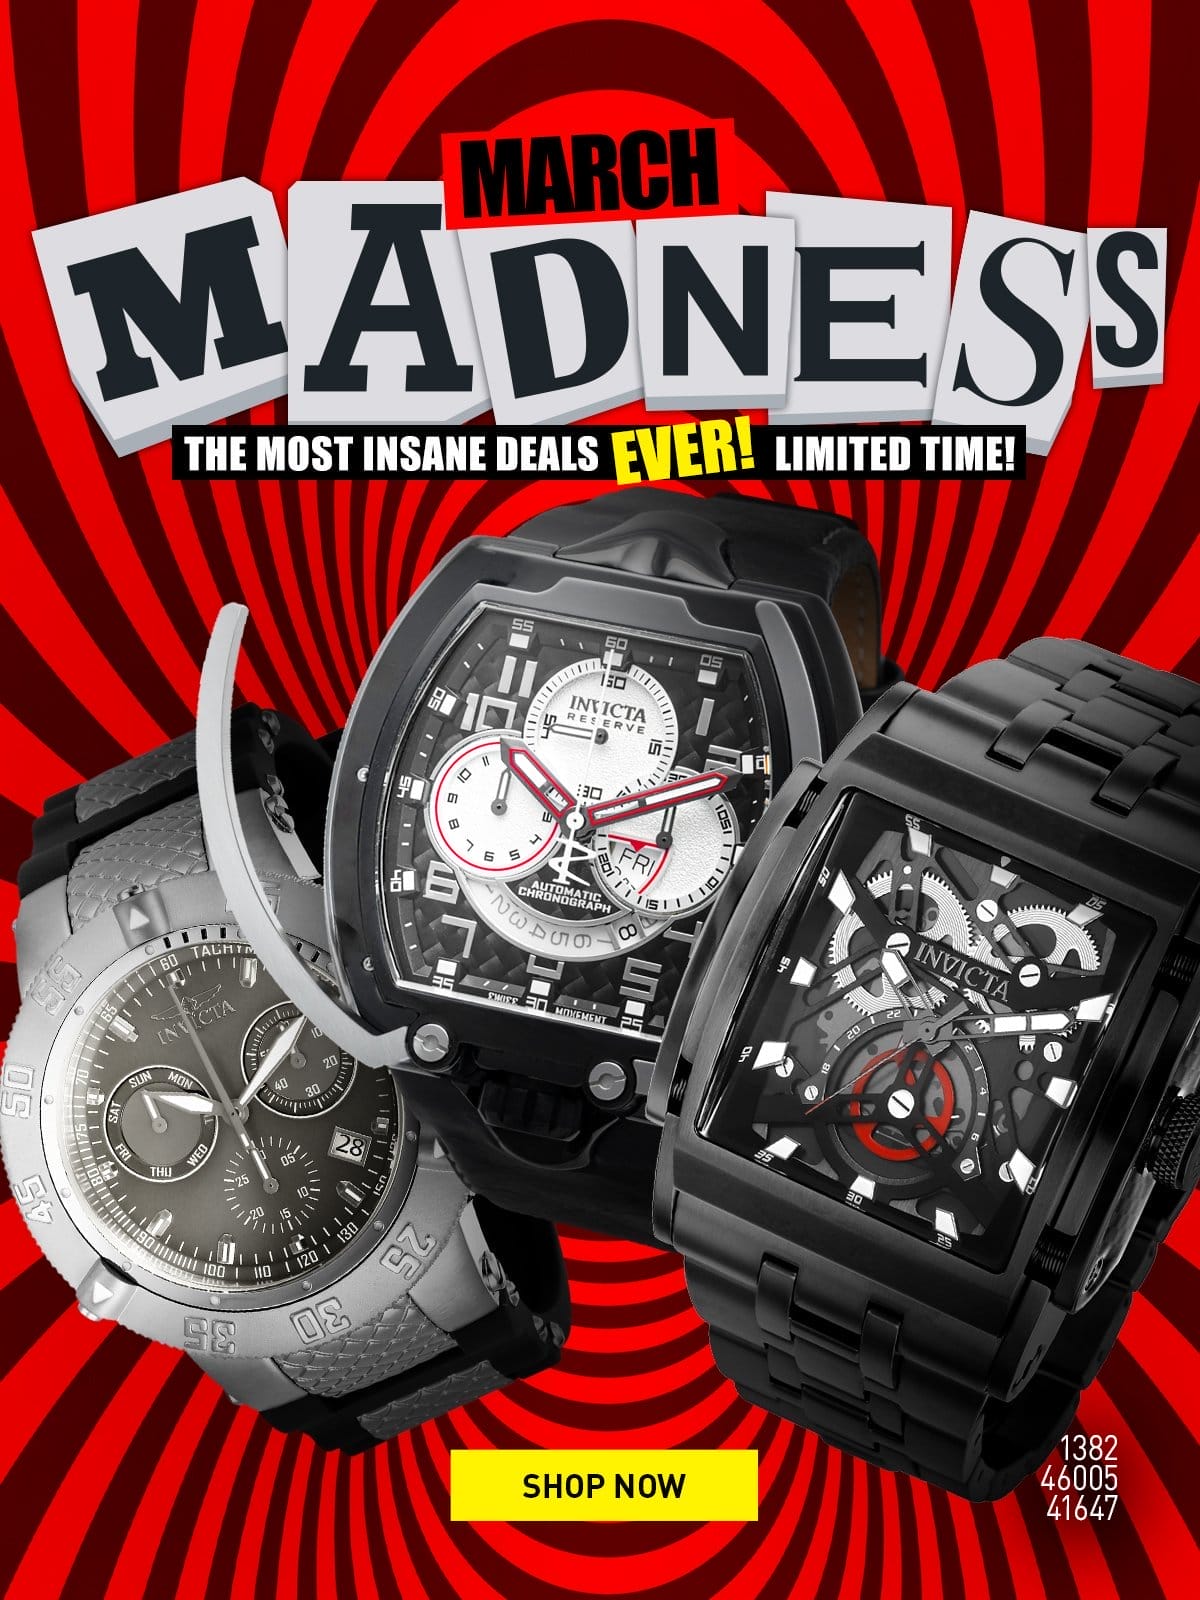 March Madness - The most insane deals ever! Limited time!